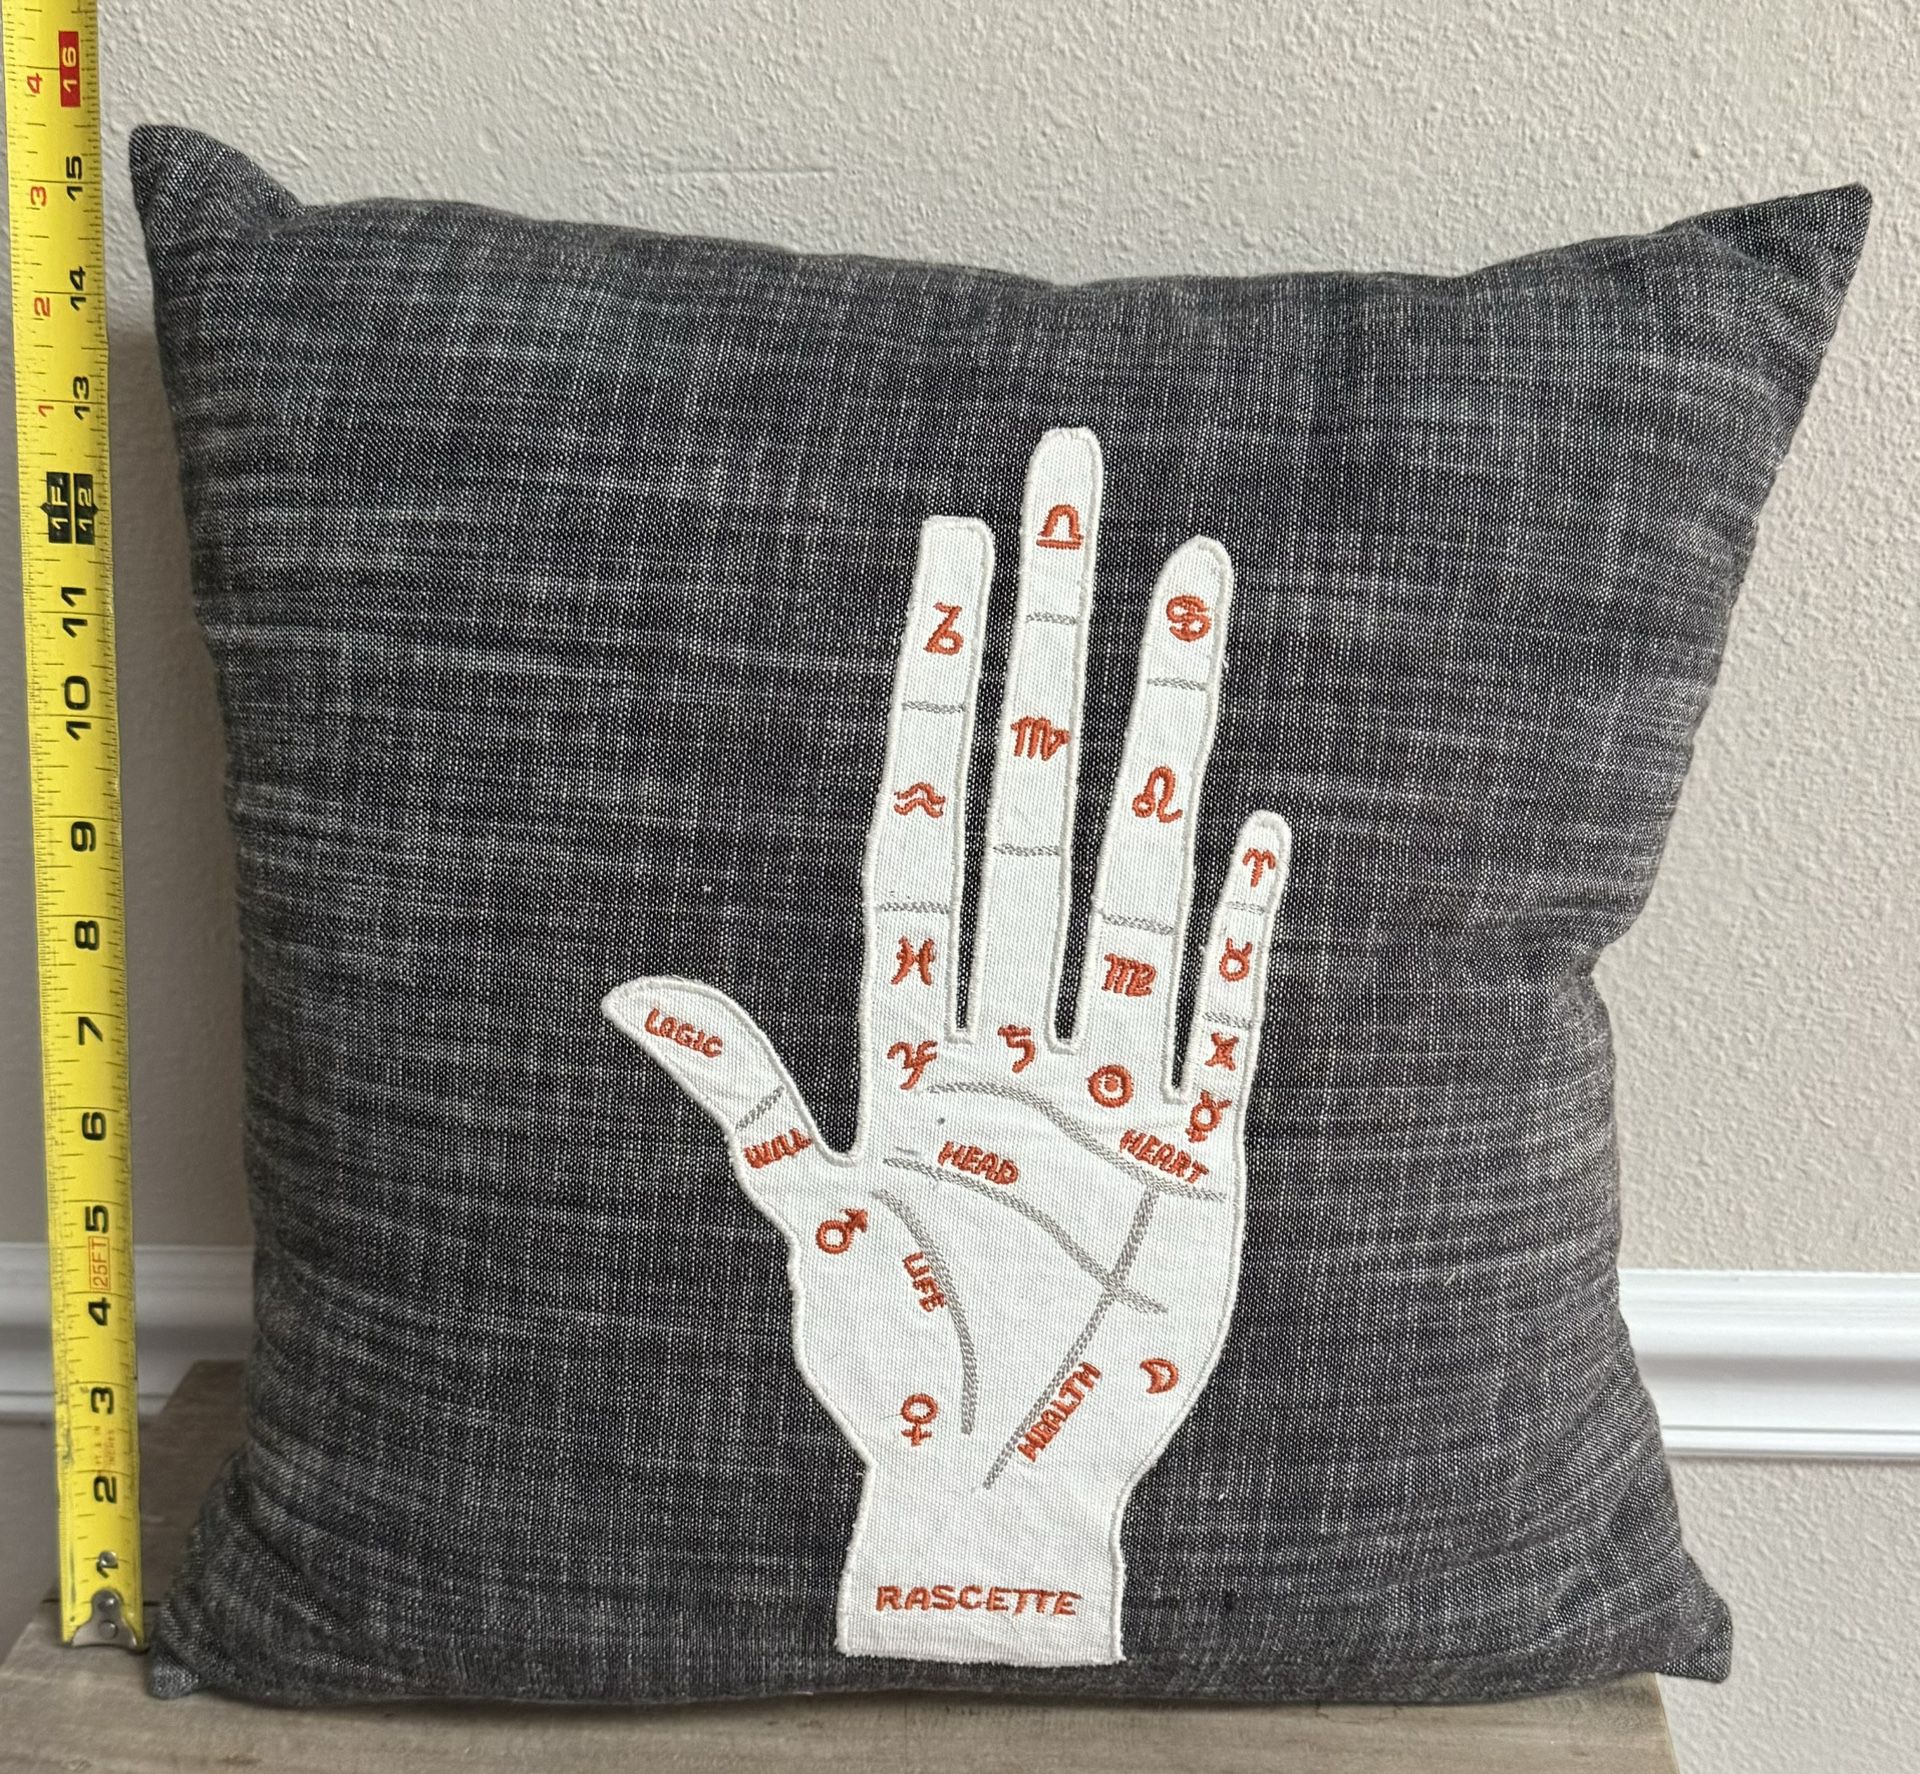 Palmistry Accent Pillow just $7 xox